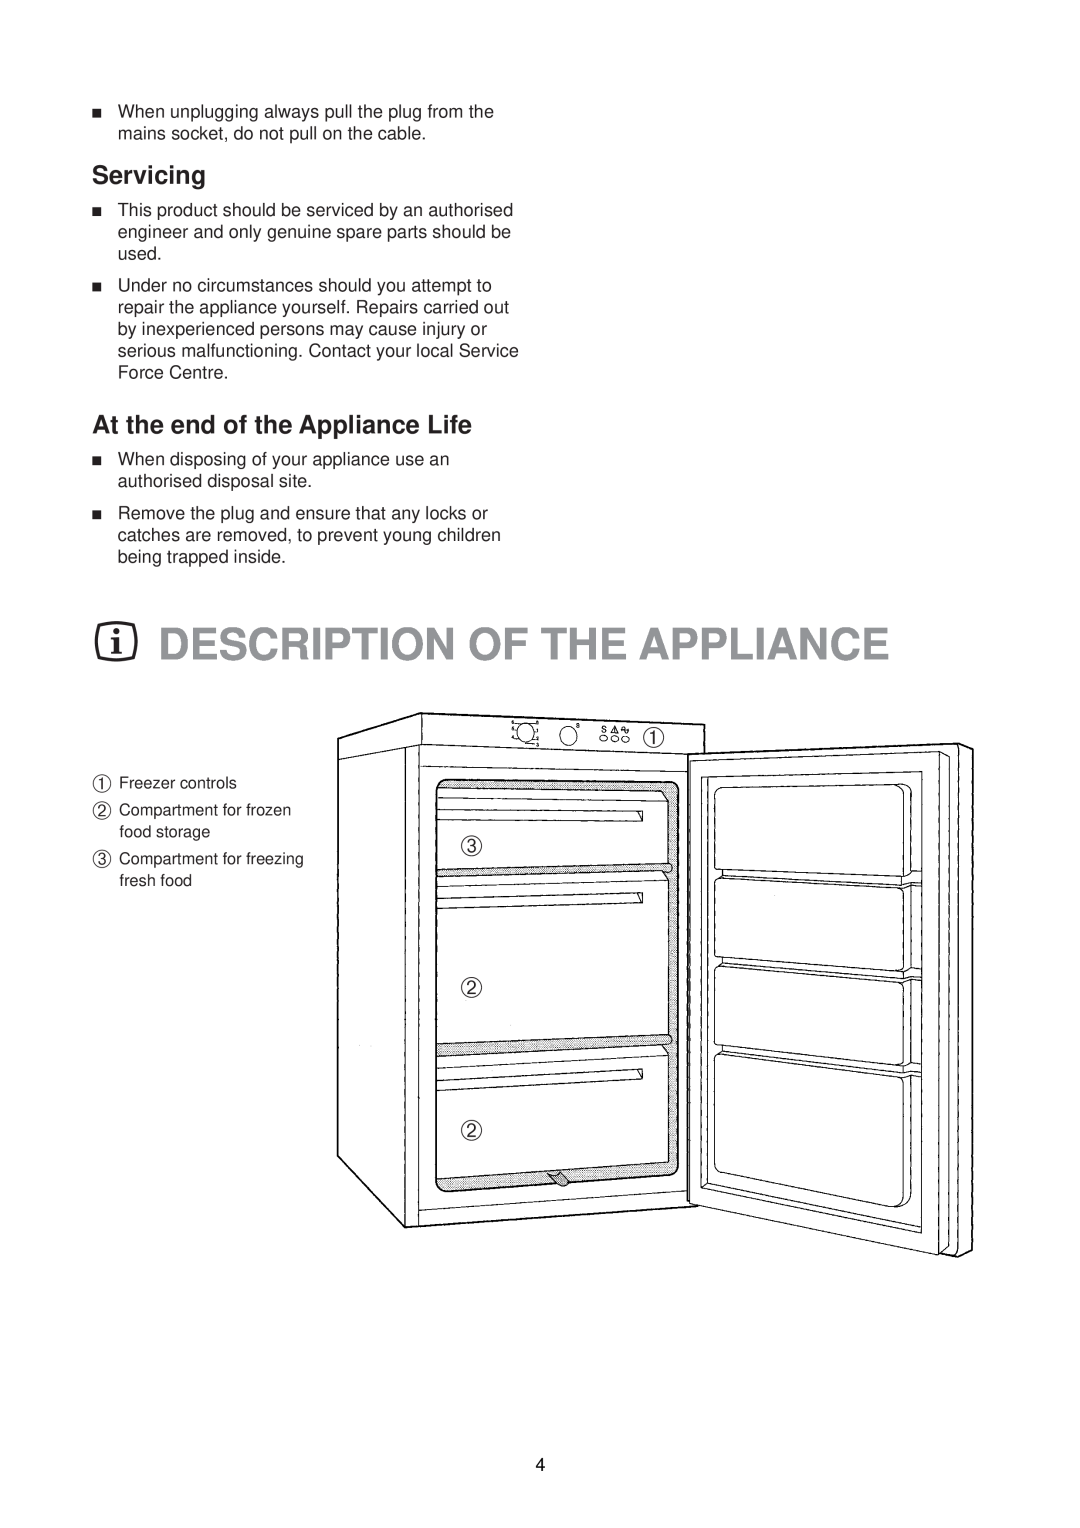 Zanussi ZF 24 W manual Description Of The Appliance, Servicing, At the end of the Appliance Life 